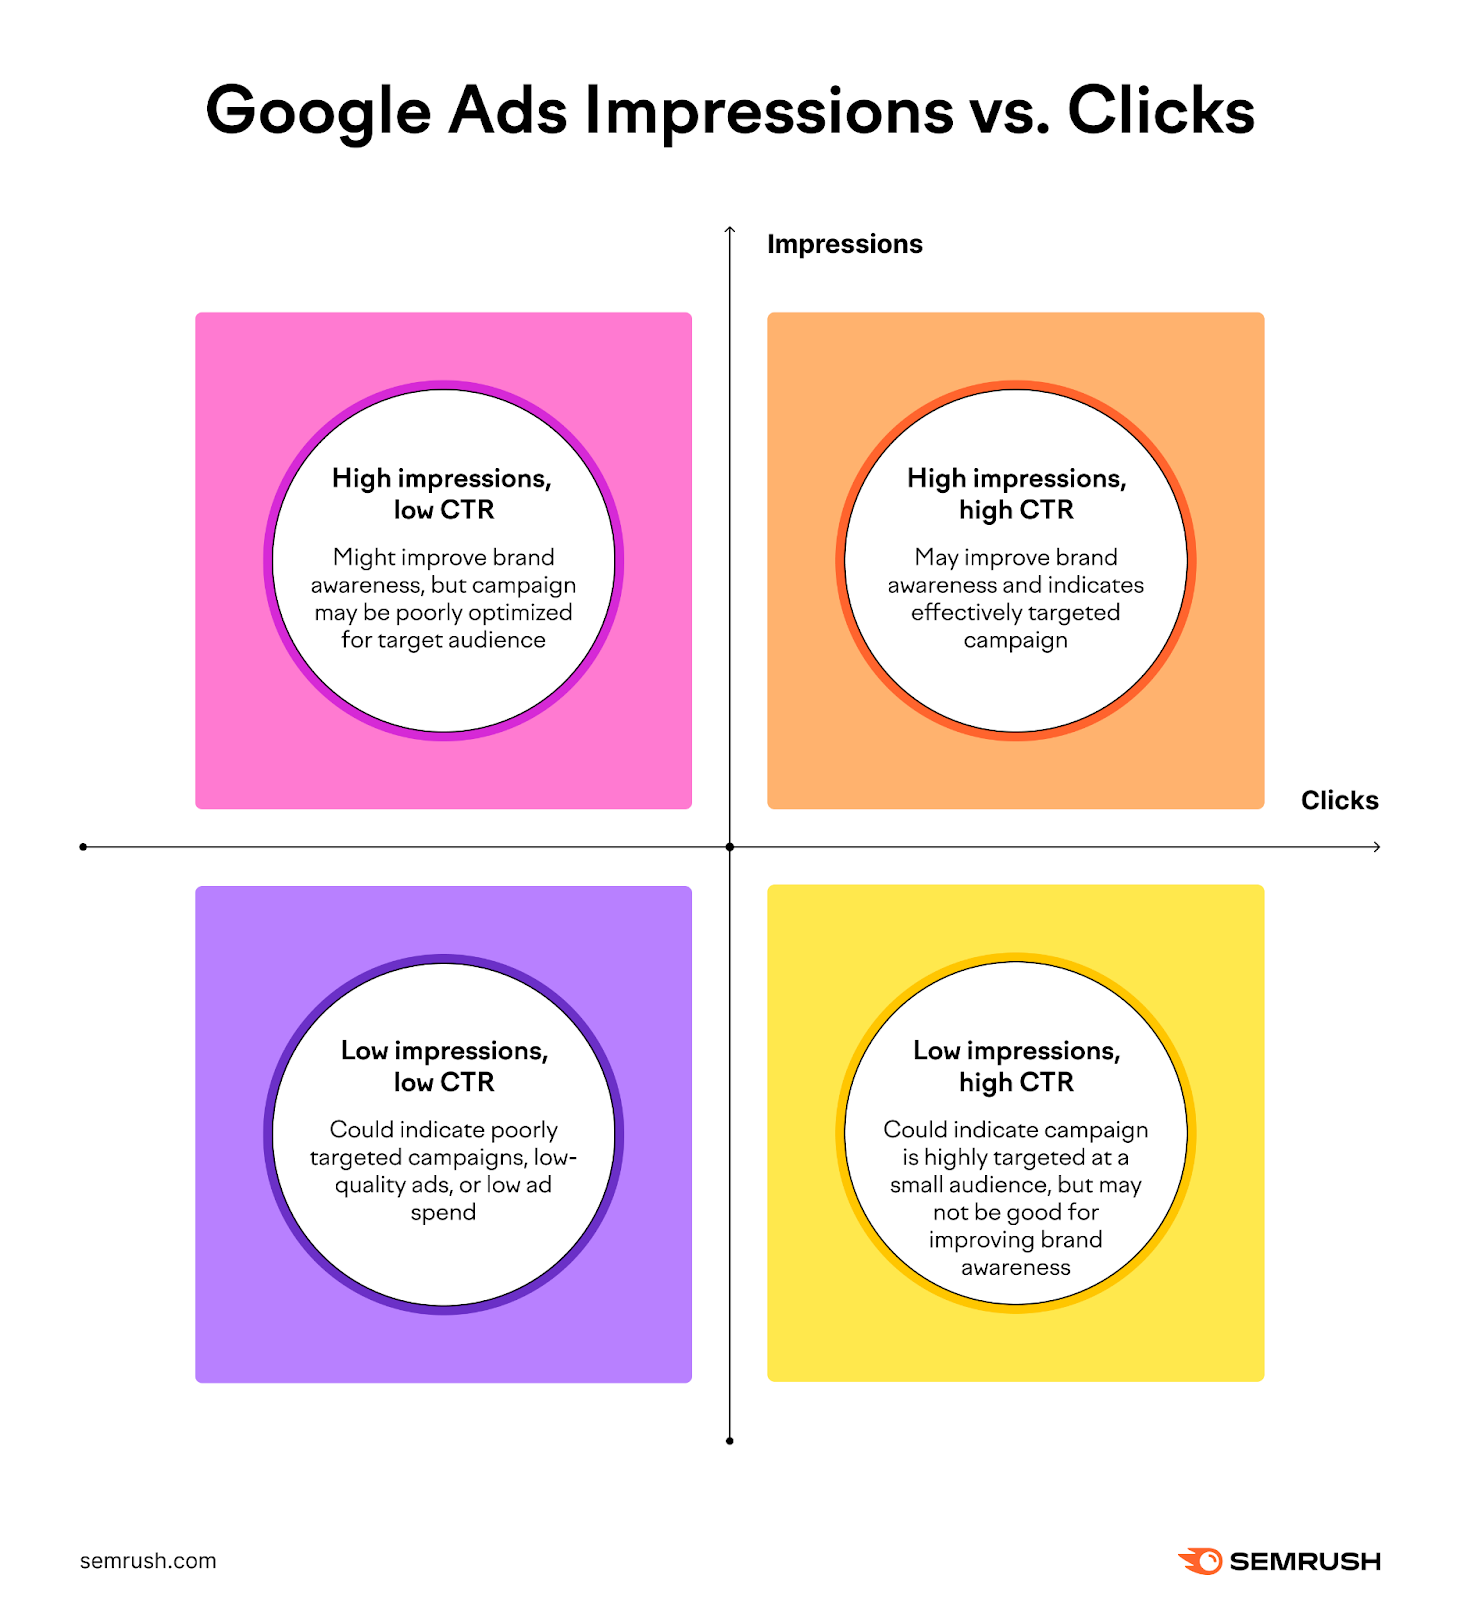 In the top left quadrant: High impressions, low CTR. Might improve brand awareness, but campaign may be poorly optimised for target audience. Top right: High impressions, high CTR. May improve brand awareness and indicates effectively targeted campaign. Bottom left: Low impressions, low CTR. Could indicate poorly targeted campaigns, low-quality ads, or low ad spend. Bottom right: Low impressions, high CTR. Could indicate campaign is highly targeted at a small audience, but may not be good for improving brand awareness